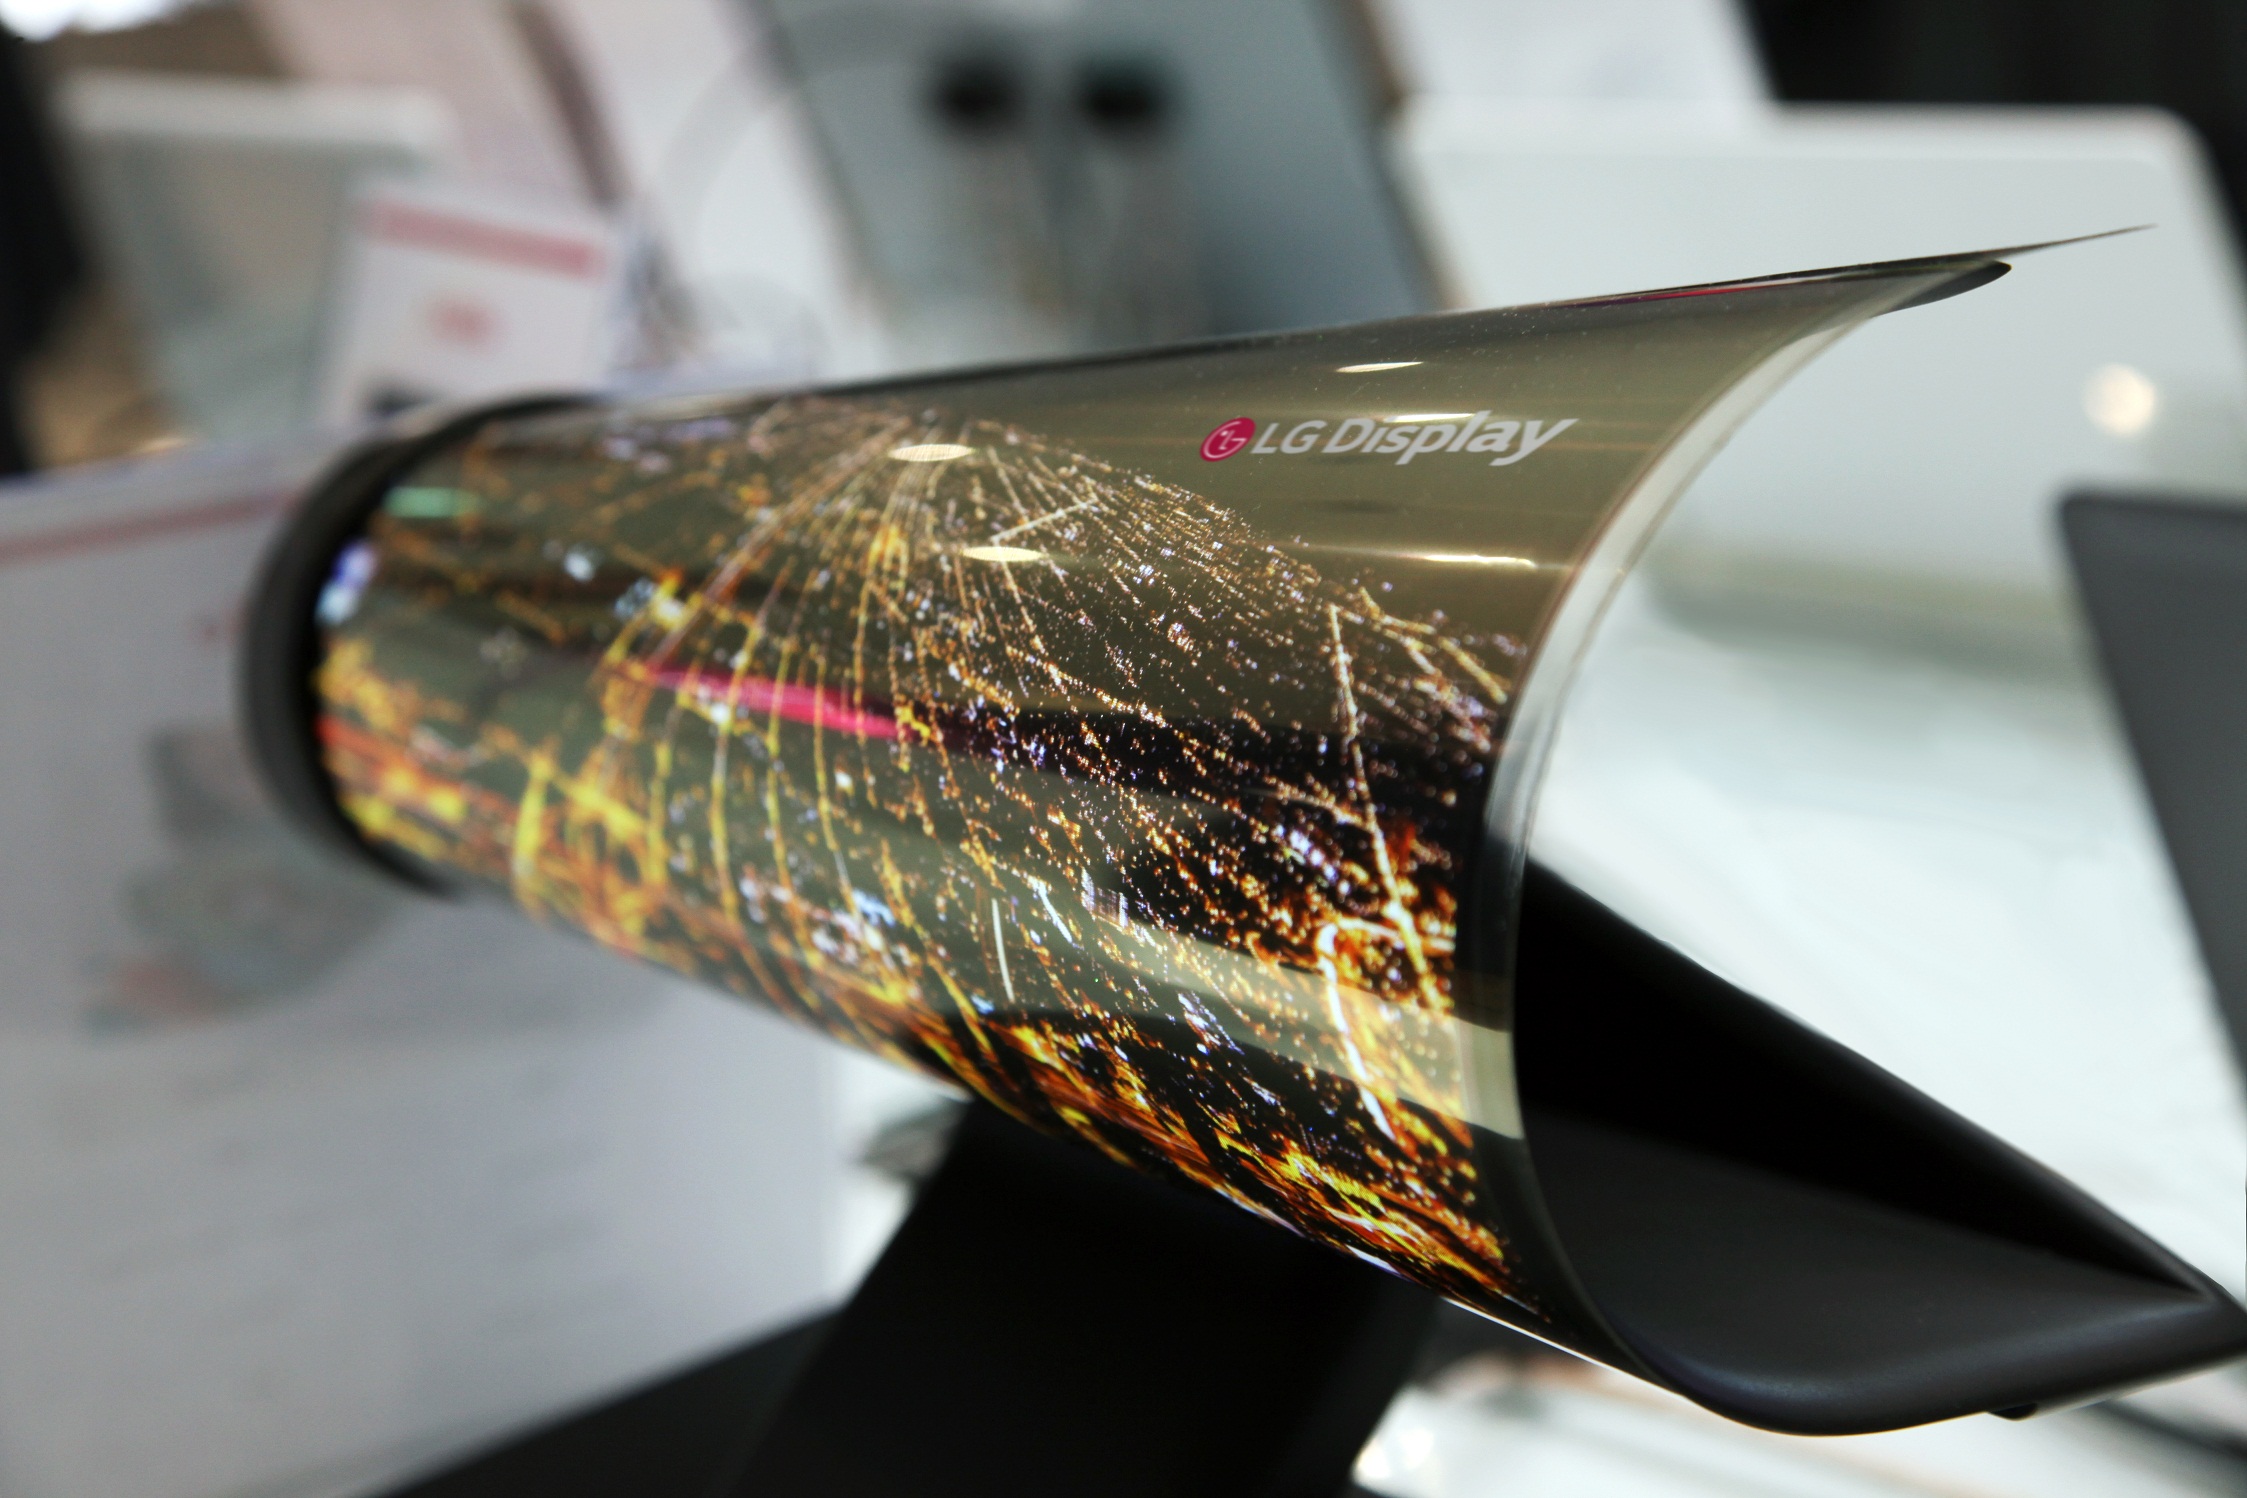 LG's Bendable Screen Can Roll Up Like a Newspaper | Time